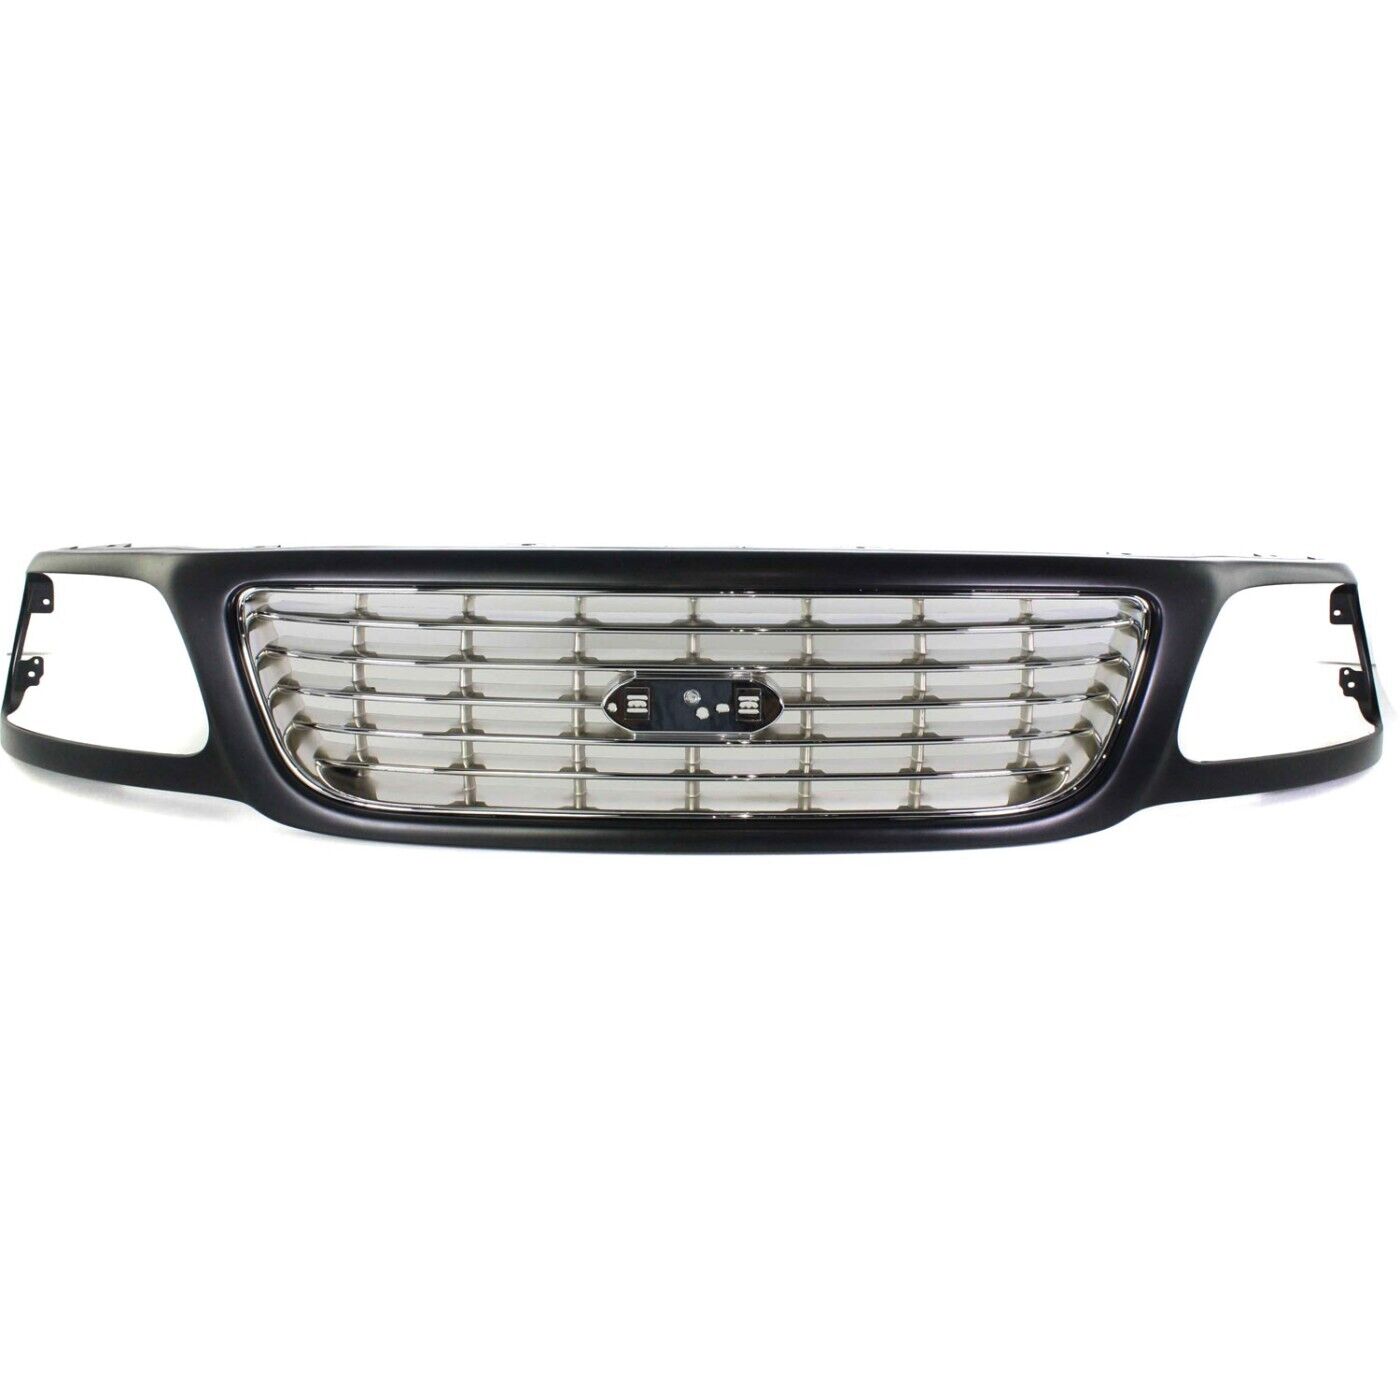 Grille Assembly For 2001-03 Ford F-150 Lightning Black Shell with Chrome Insert